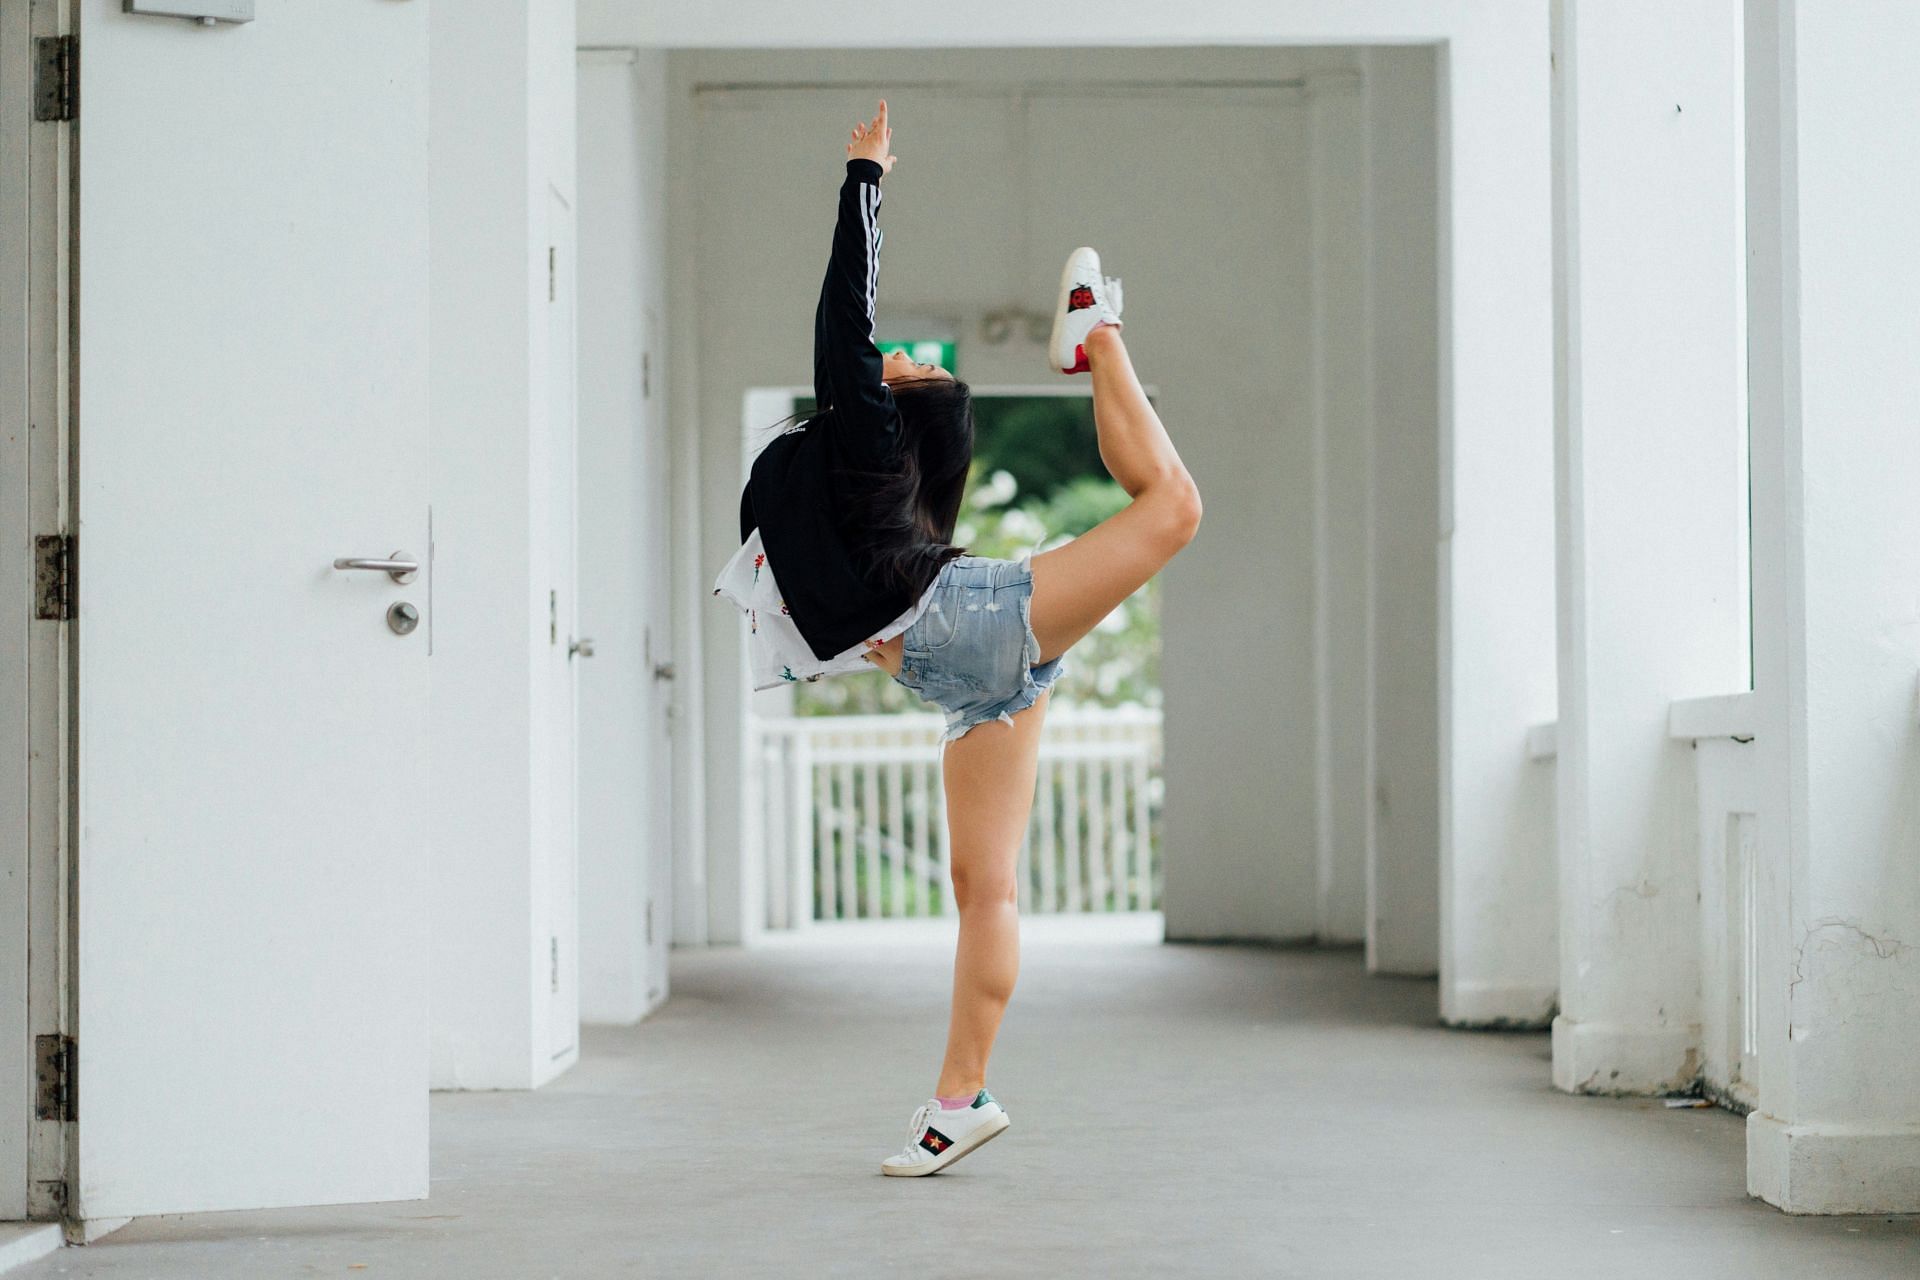 Dance and cardio can be combined fun (Image by Hanson Lu/Unsplash)